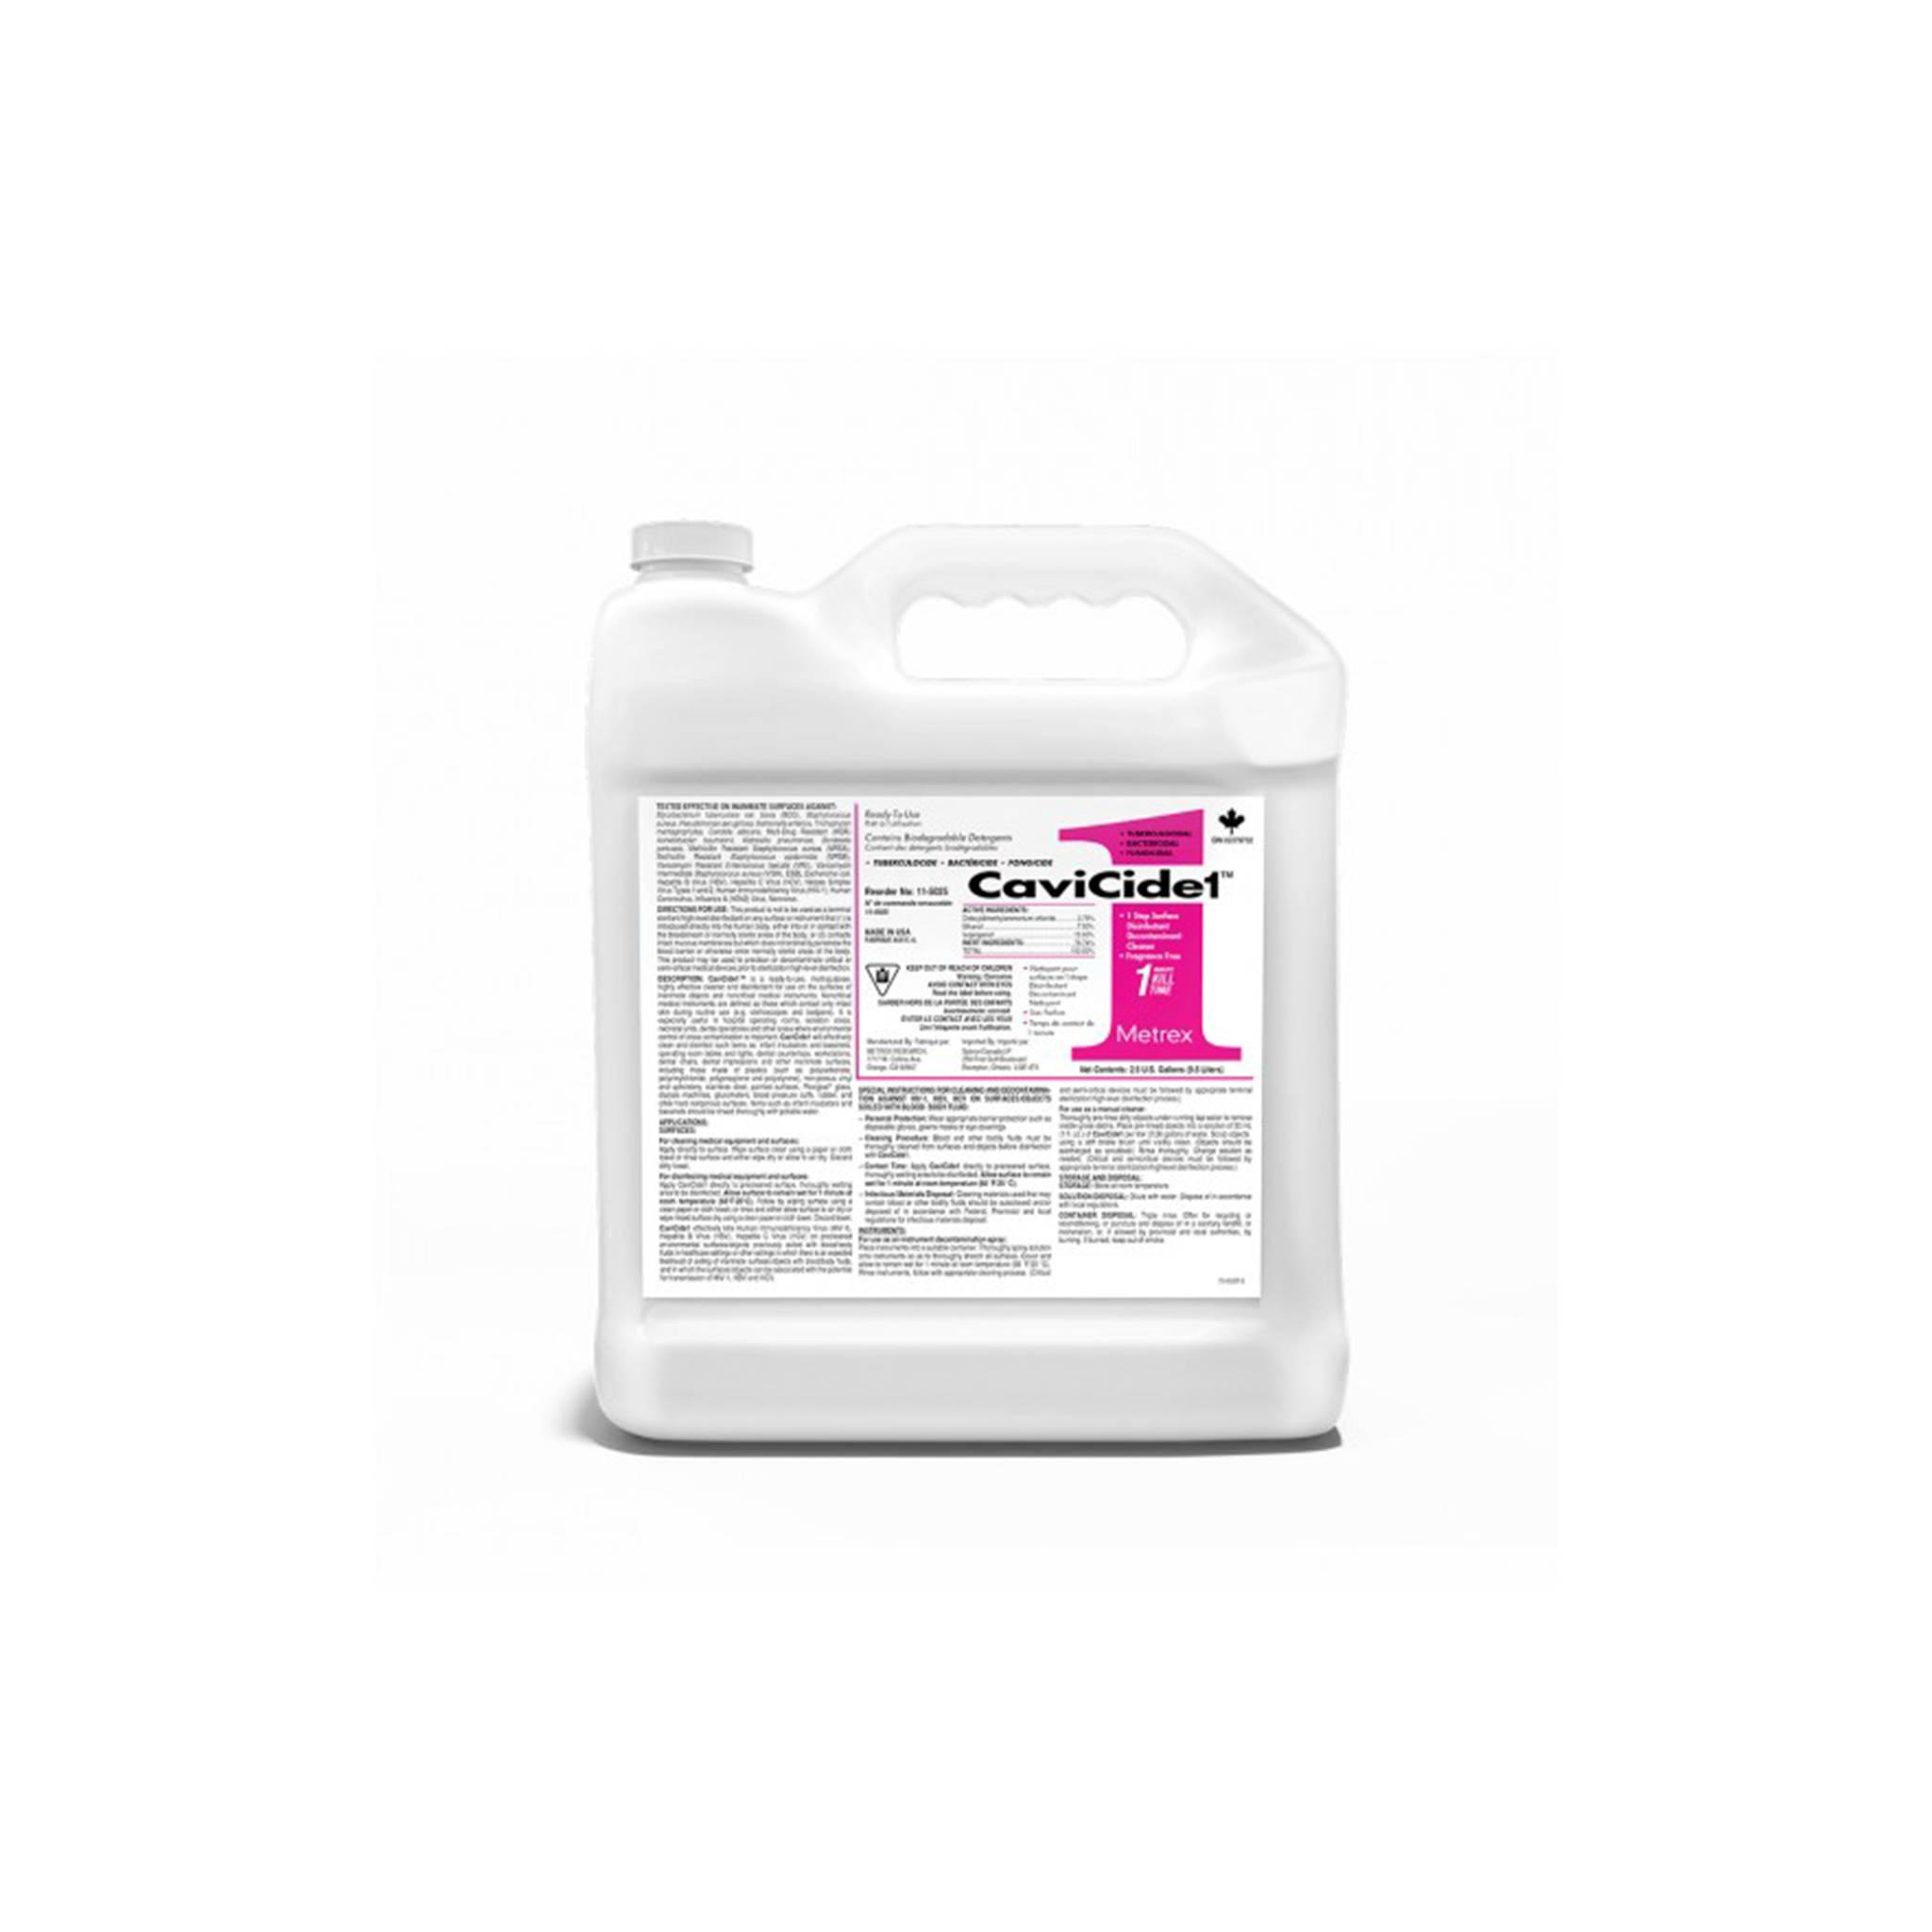 CaviCide1 Surface Disinfectant - 2.5 gallon